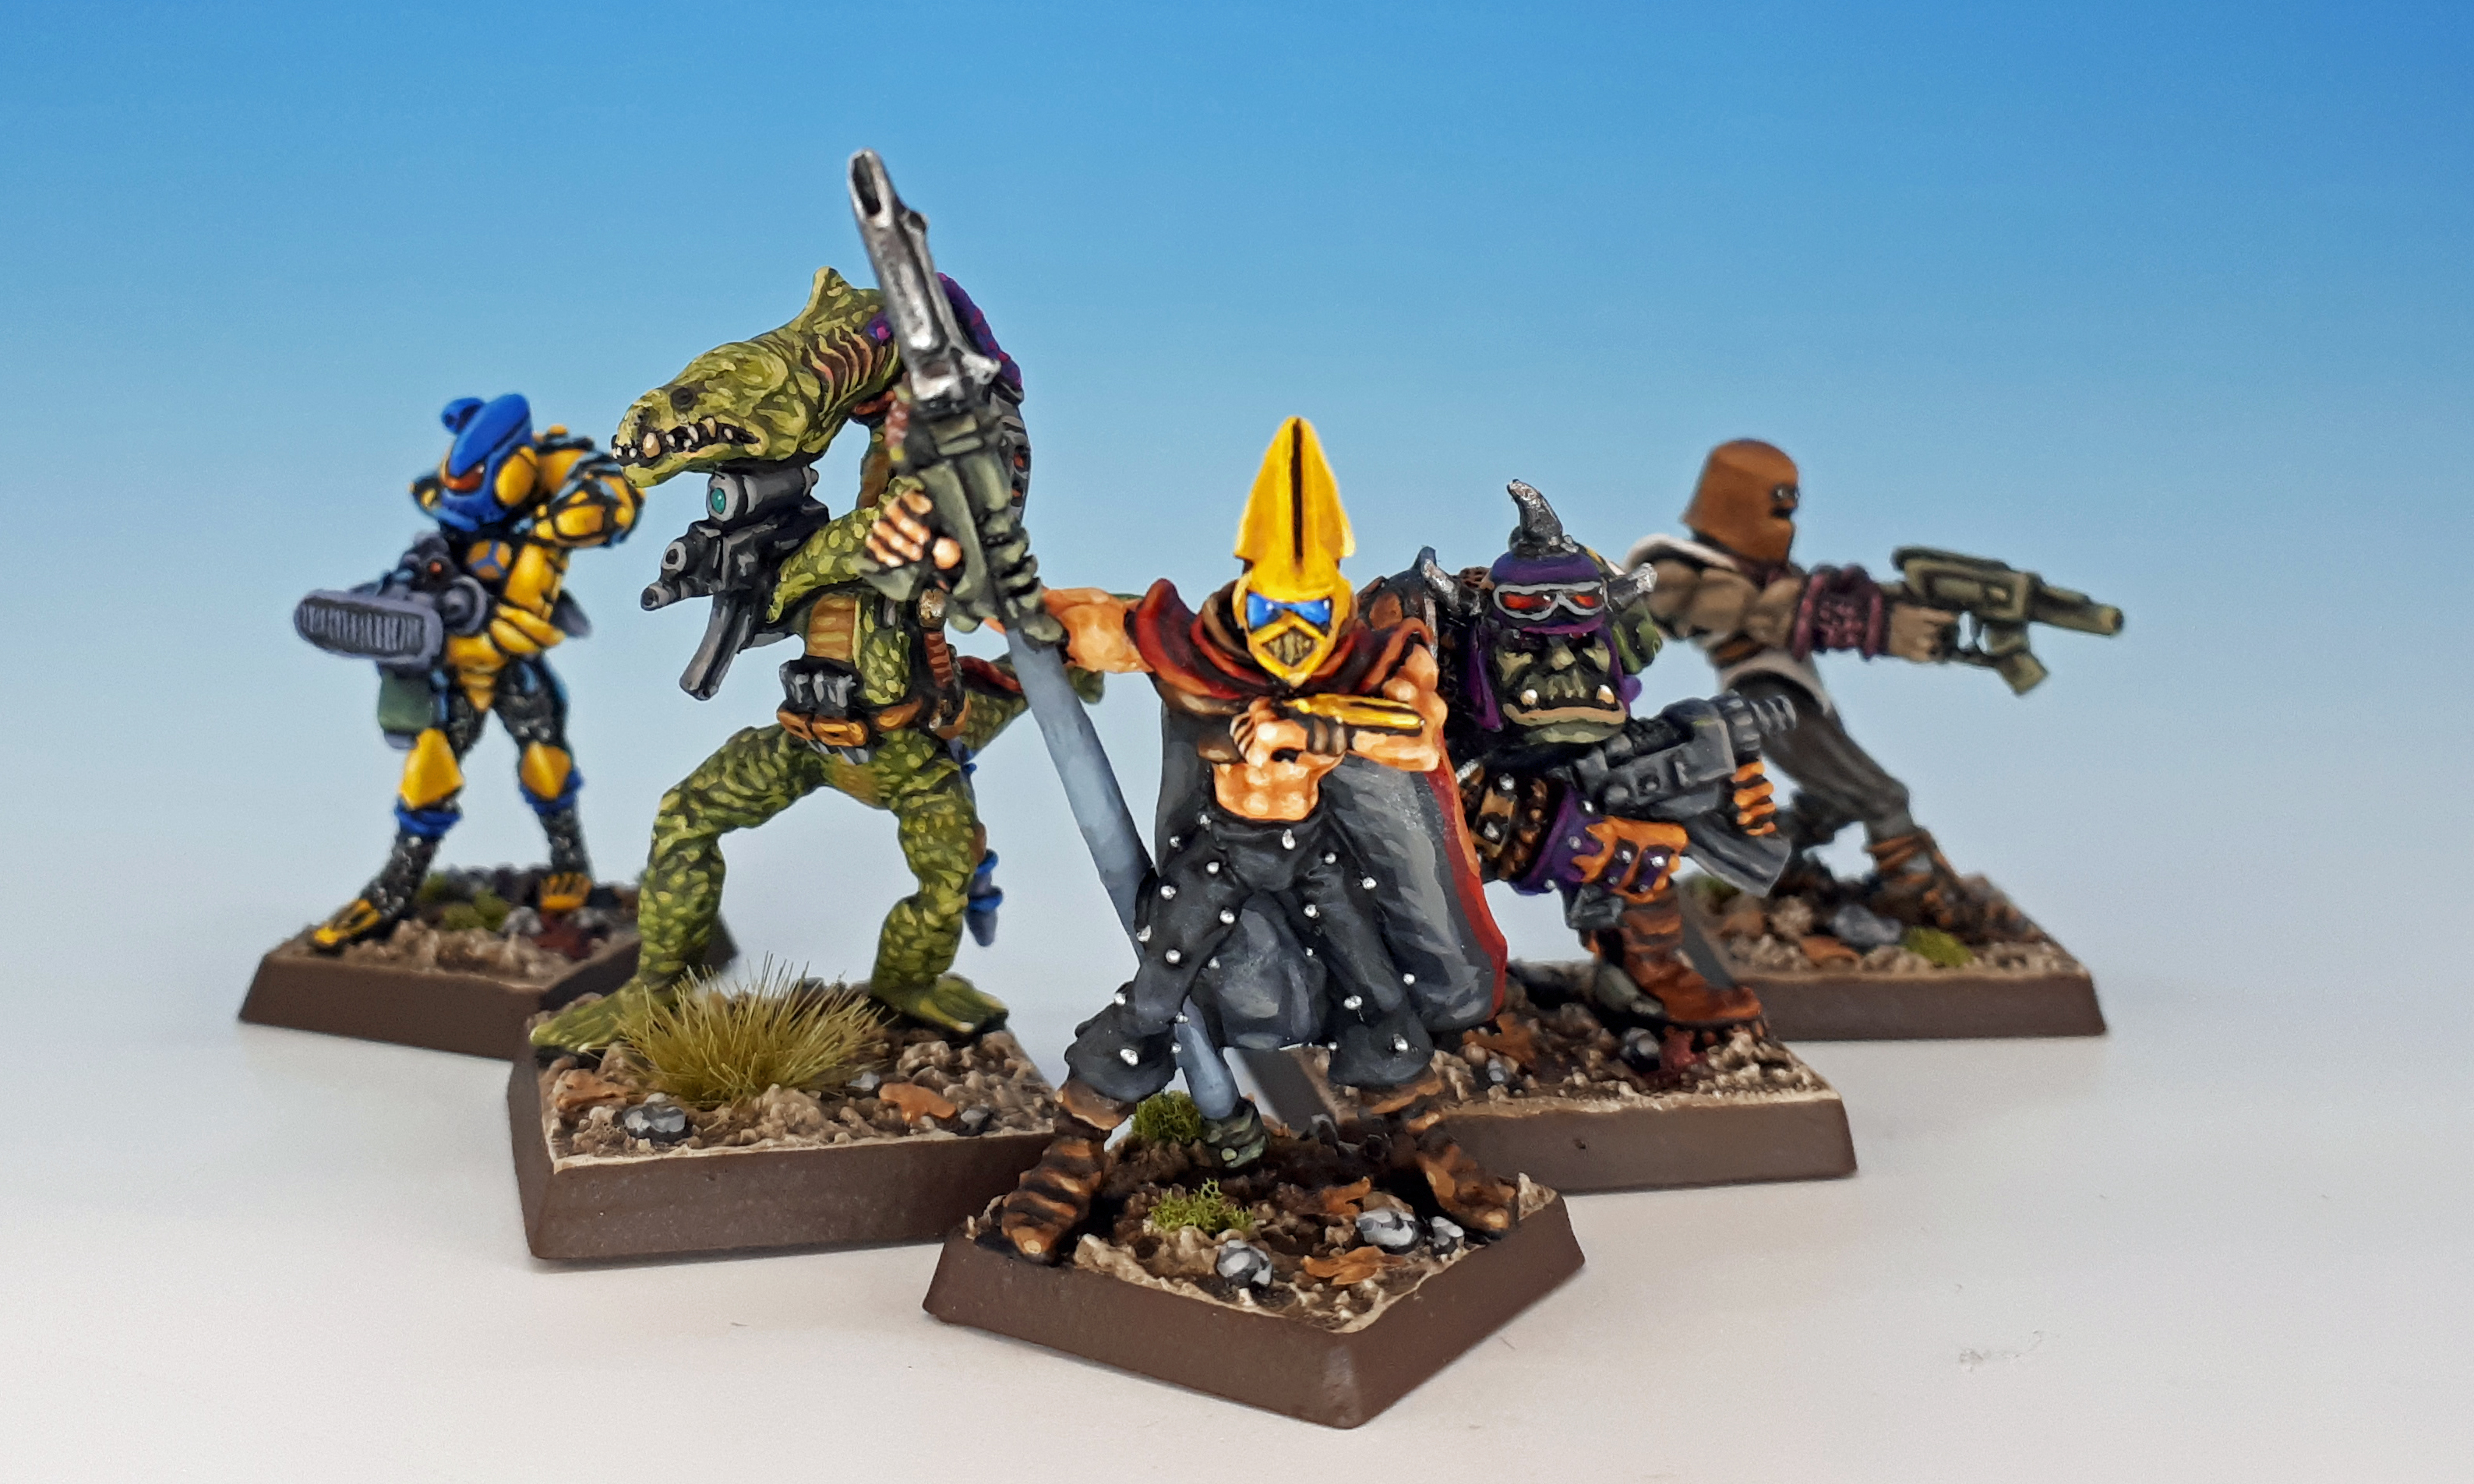 Oldenhammer in Toronto: The First Rogue Trader Miniatures